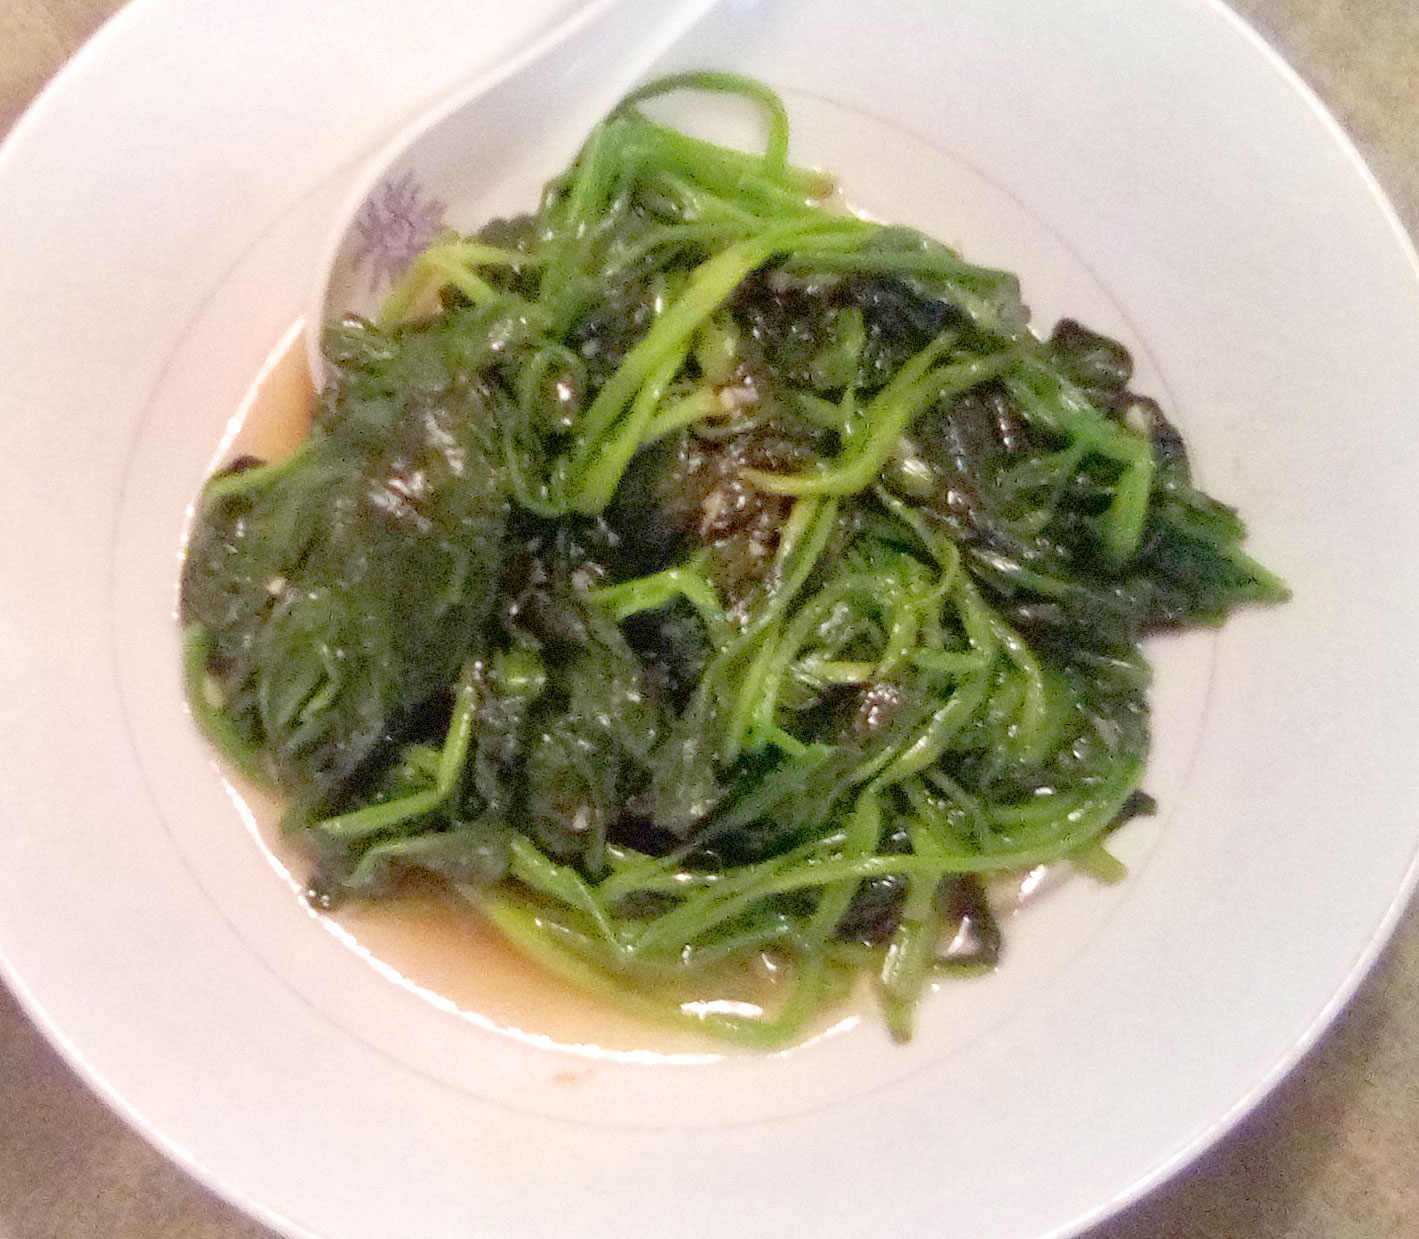 On a white plate, there is a circular serving of spinach, wilted and in a light sauce. Photo by Paul Young.